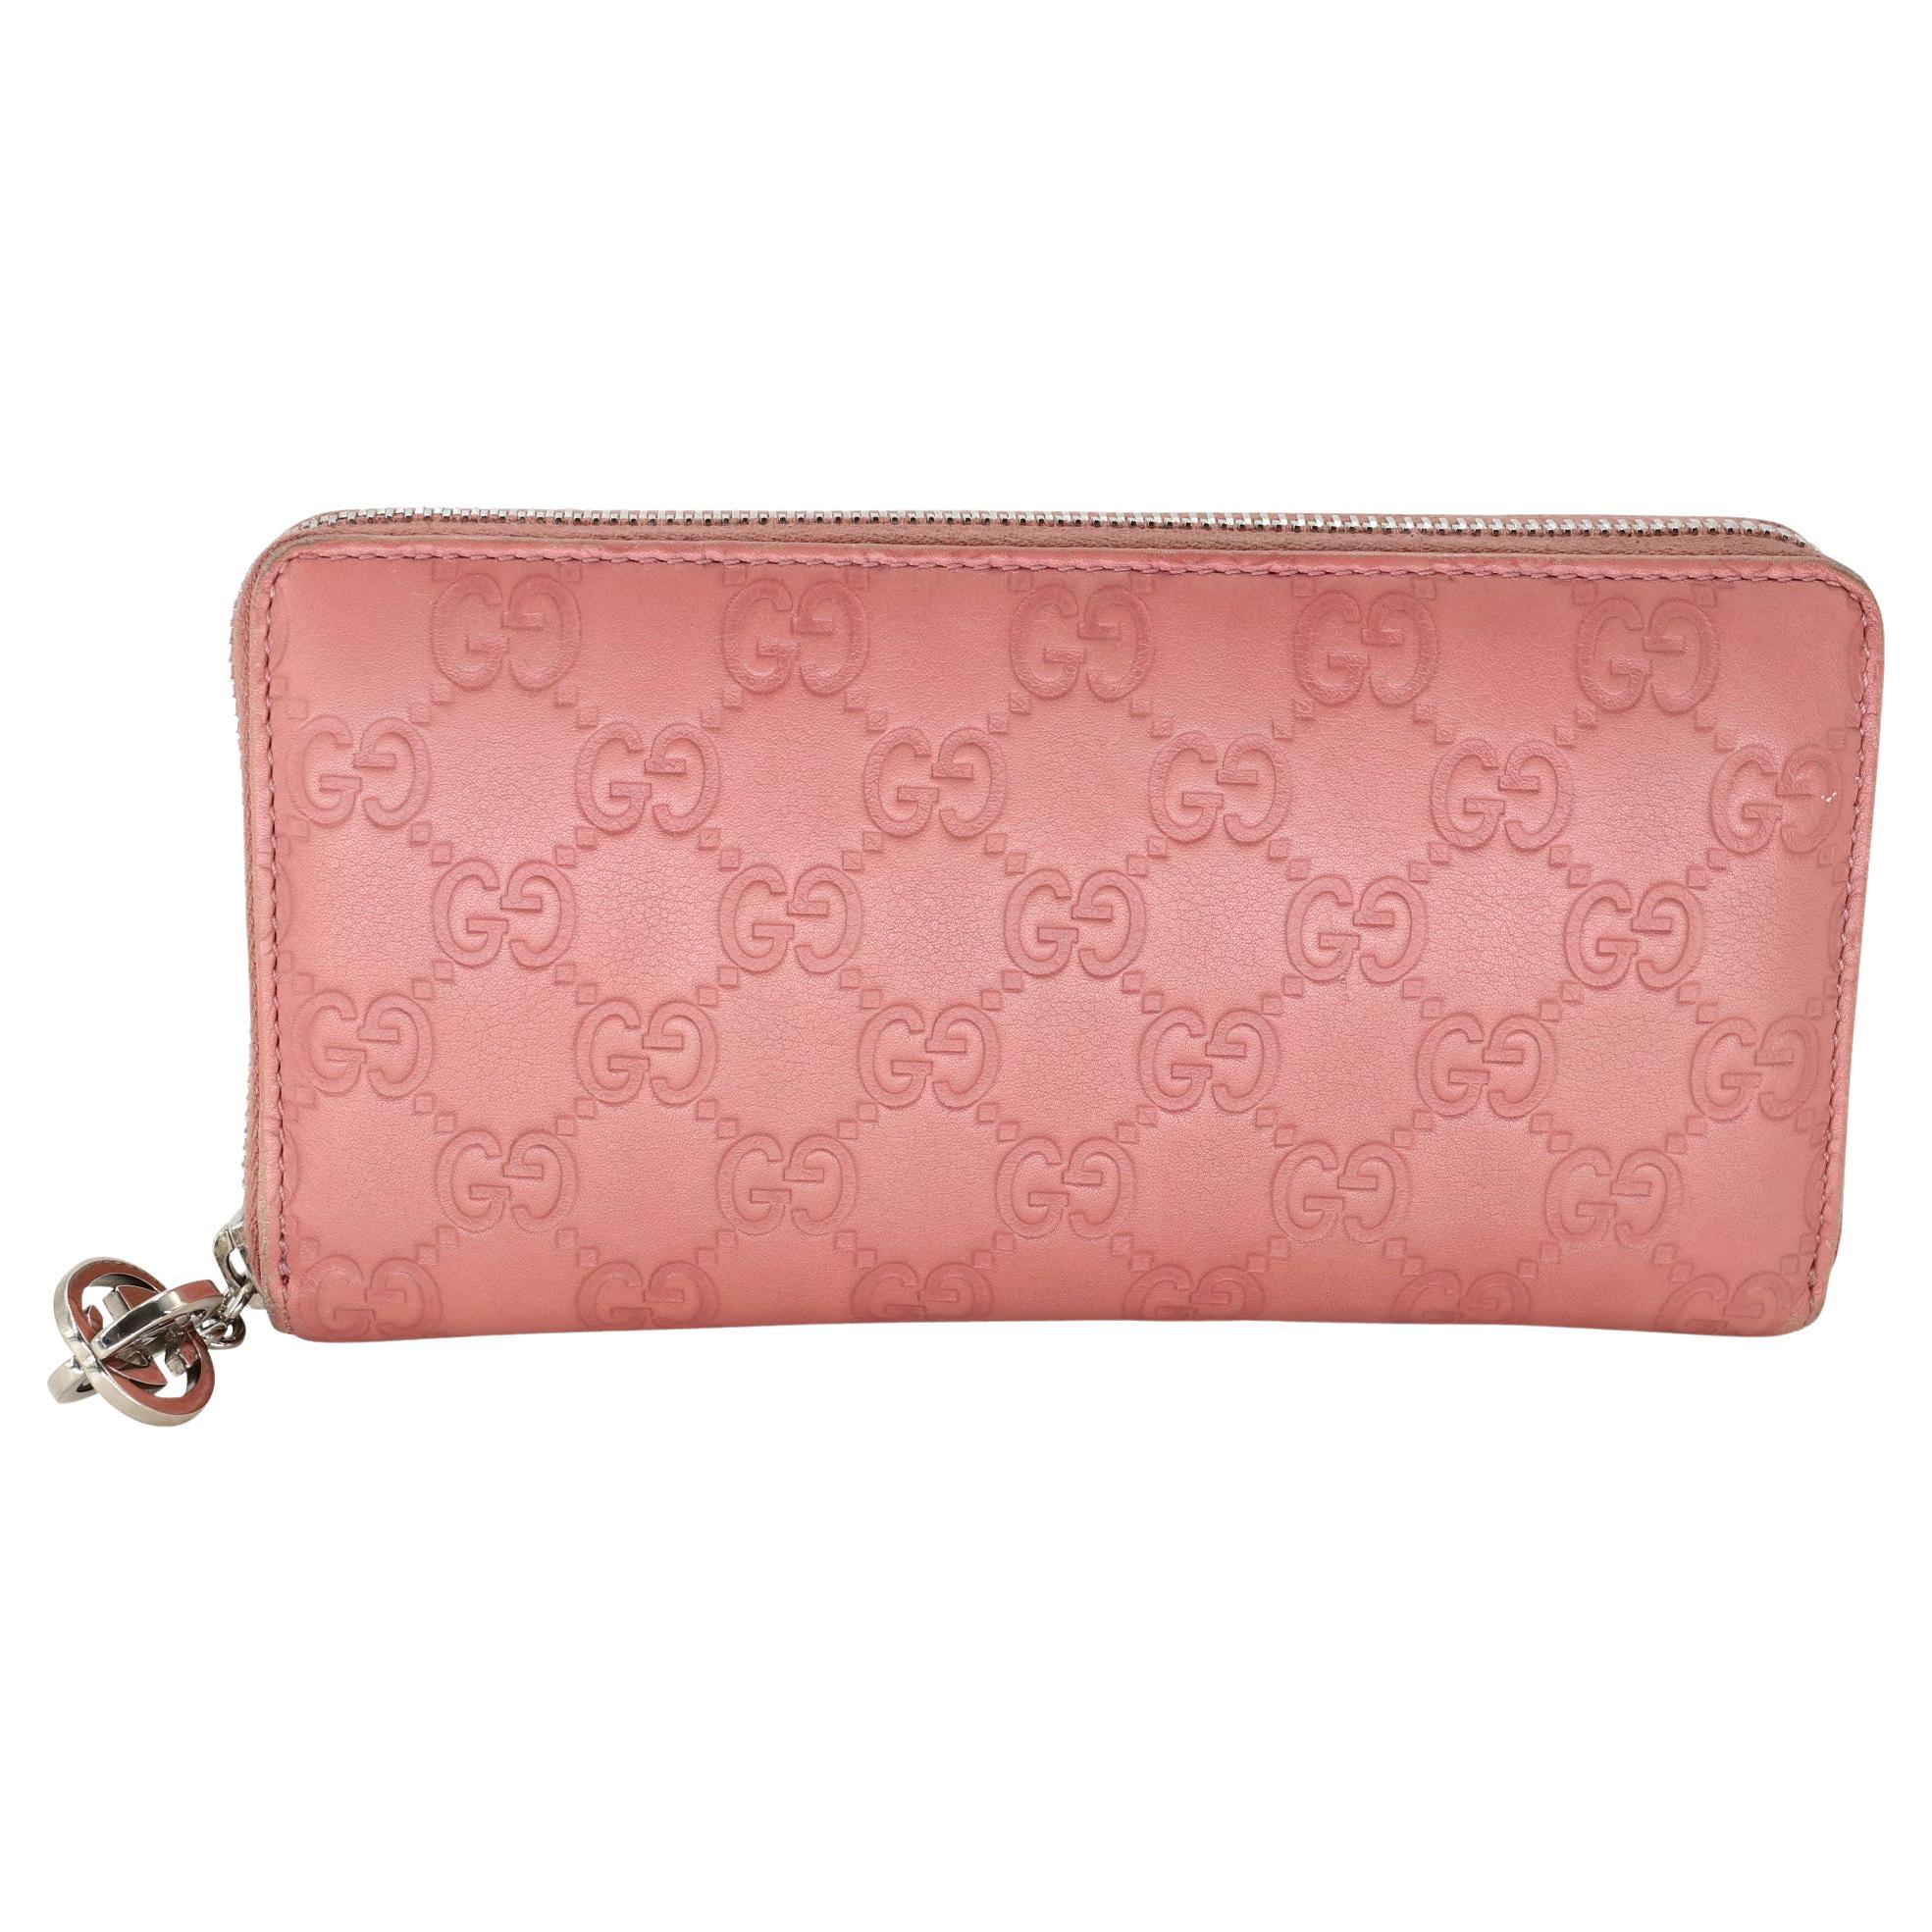 What Goes Around Comes Around Gucci Pink Leather GG Marmont Wallet